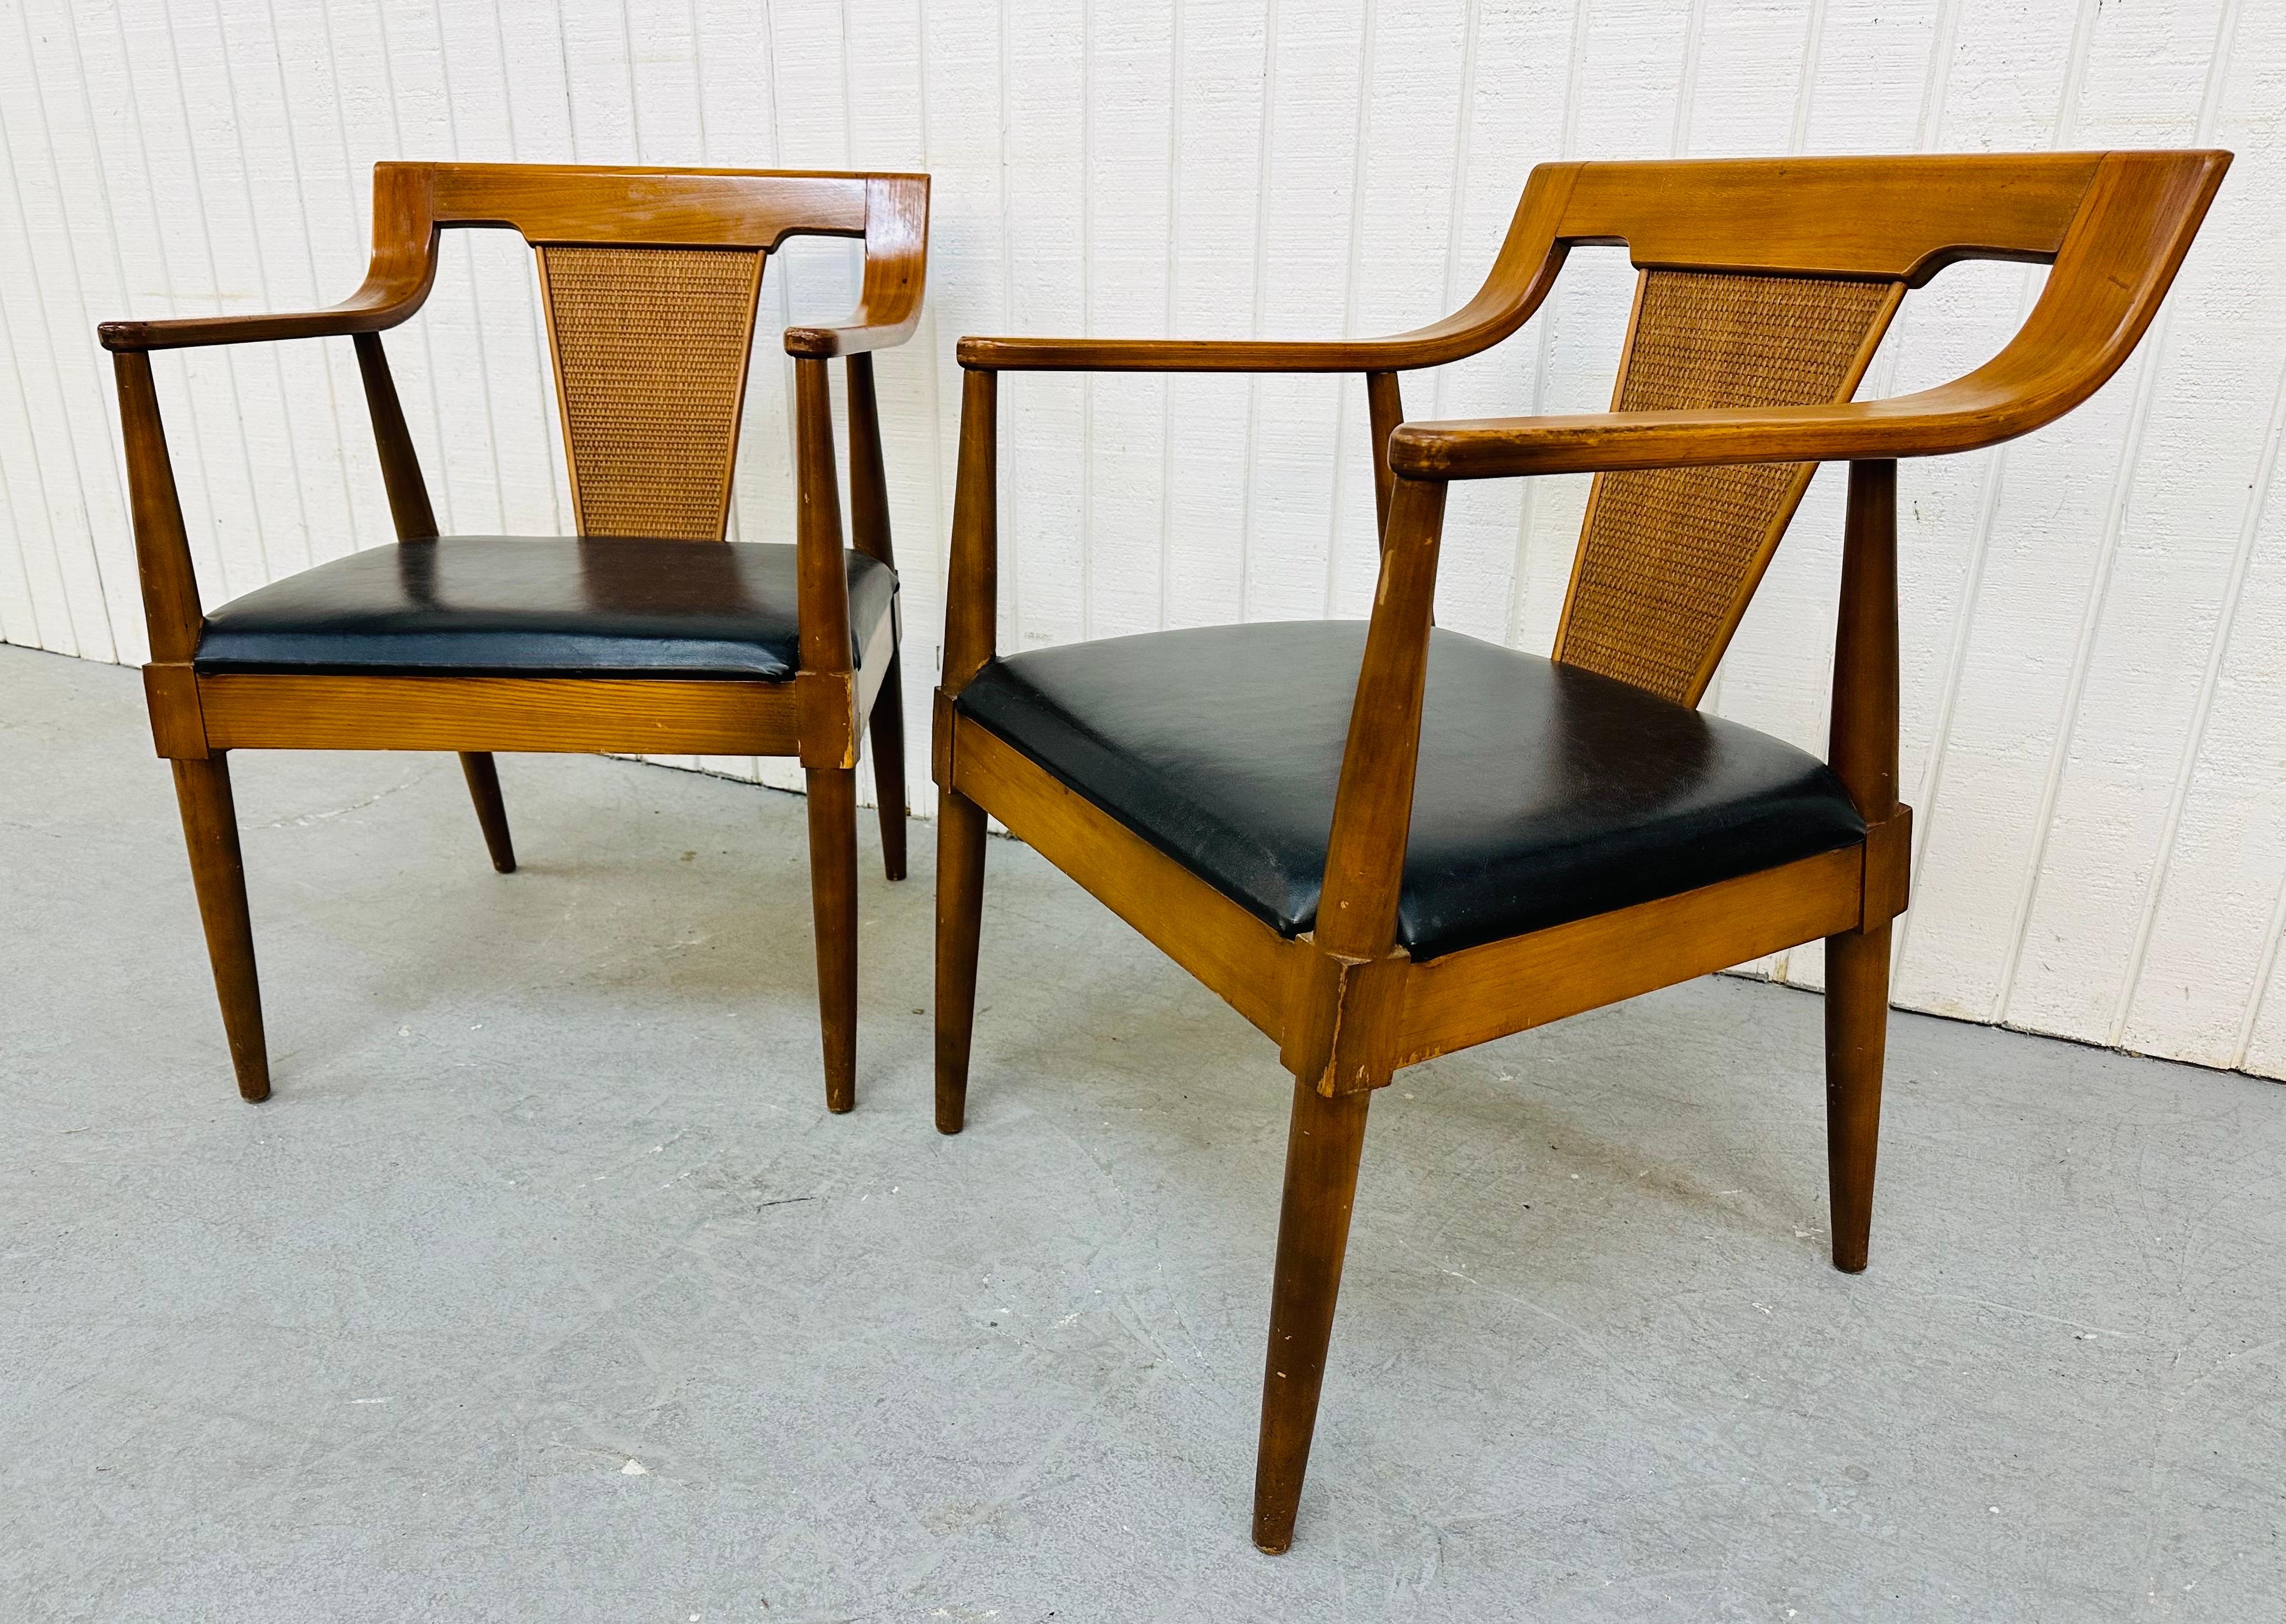 This listing is for a pair of Mid-Century Modern walnut arm chairs. Featuring walnut frames, a cane style back rest, and black vinyl seats.